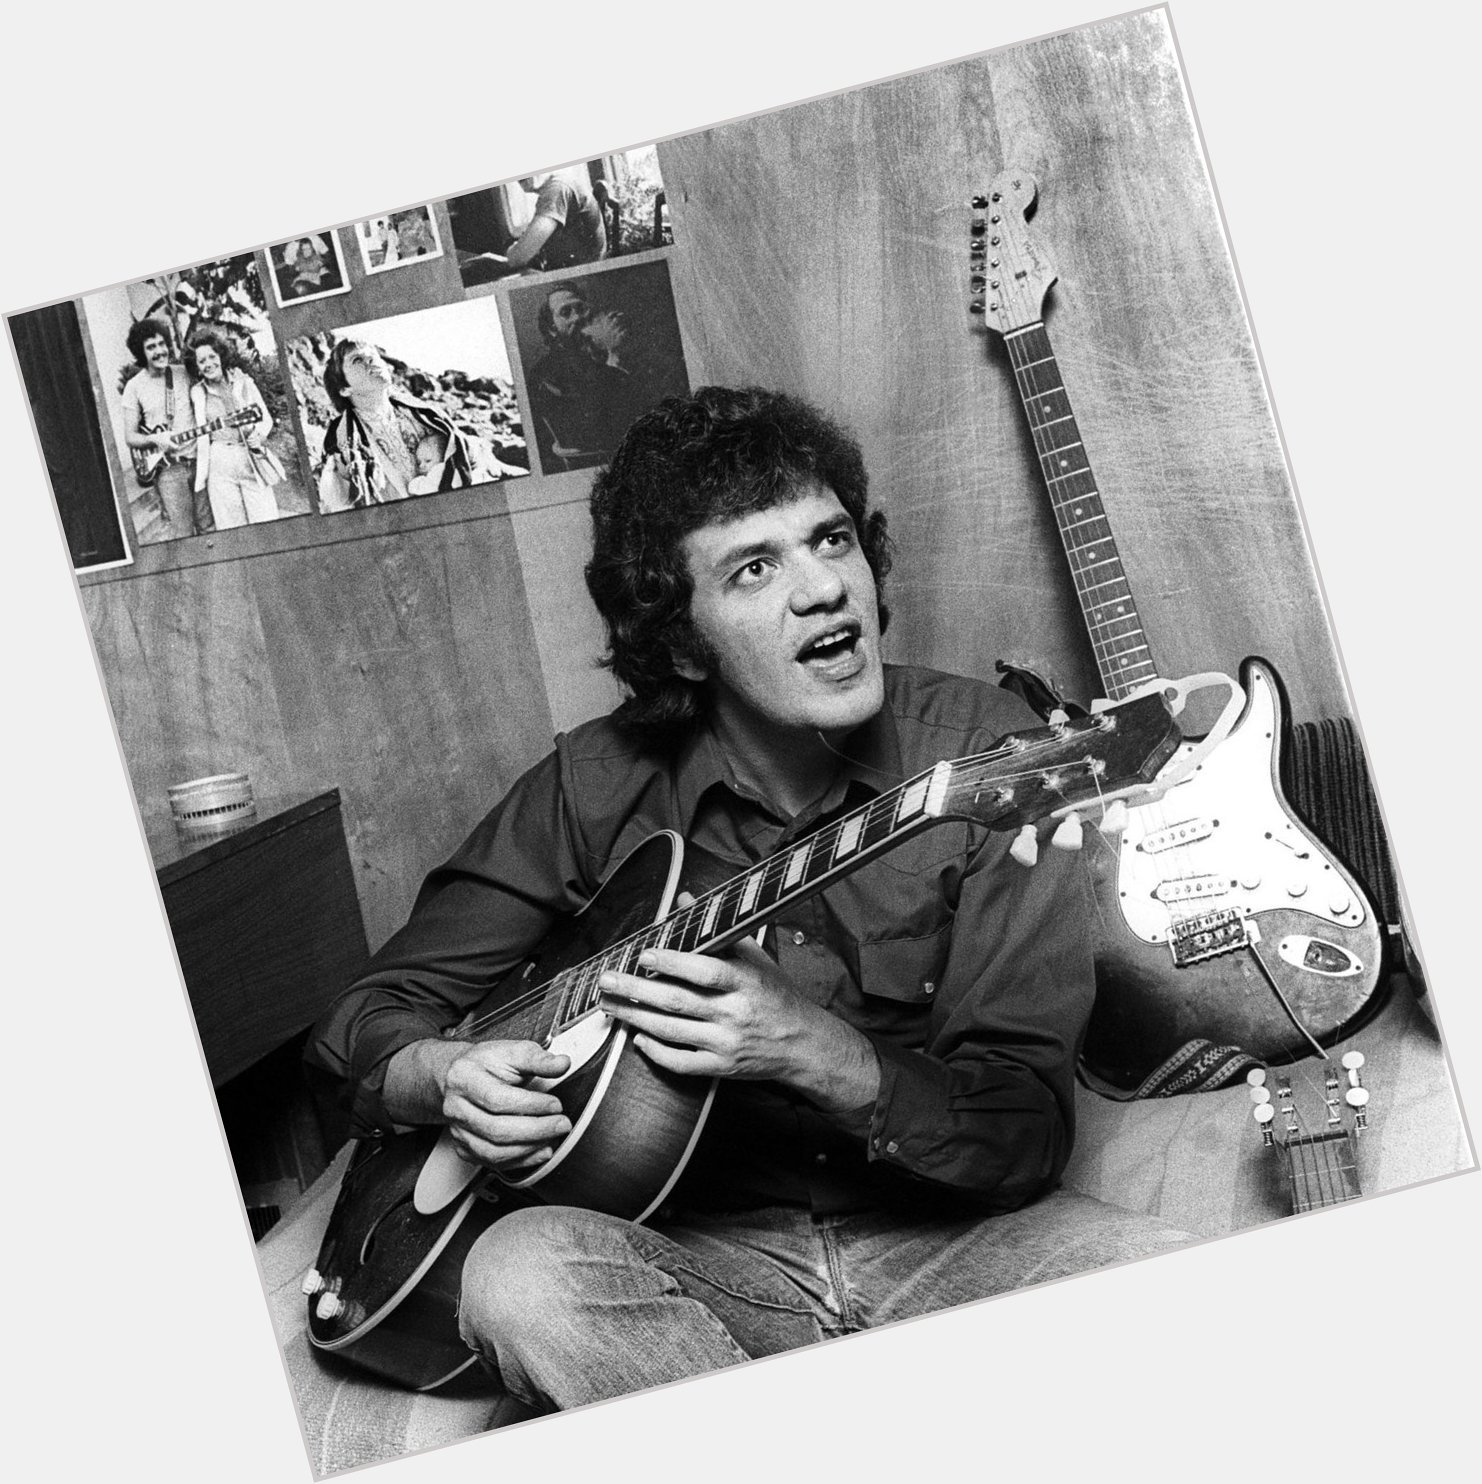 Happy birthday Mike Bloomfield of The Electric Flag! 